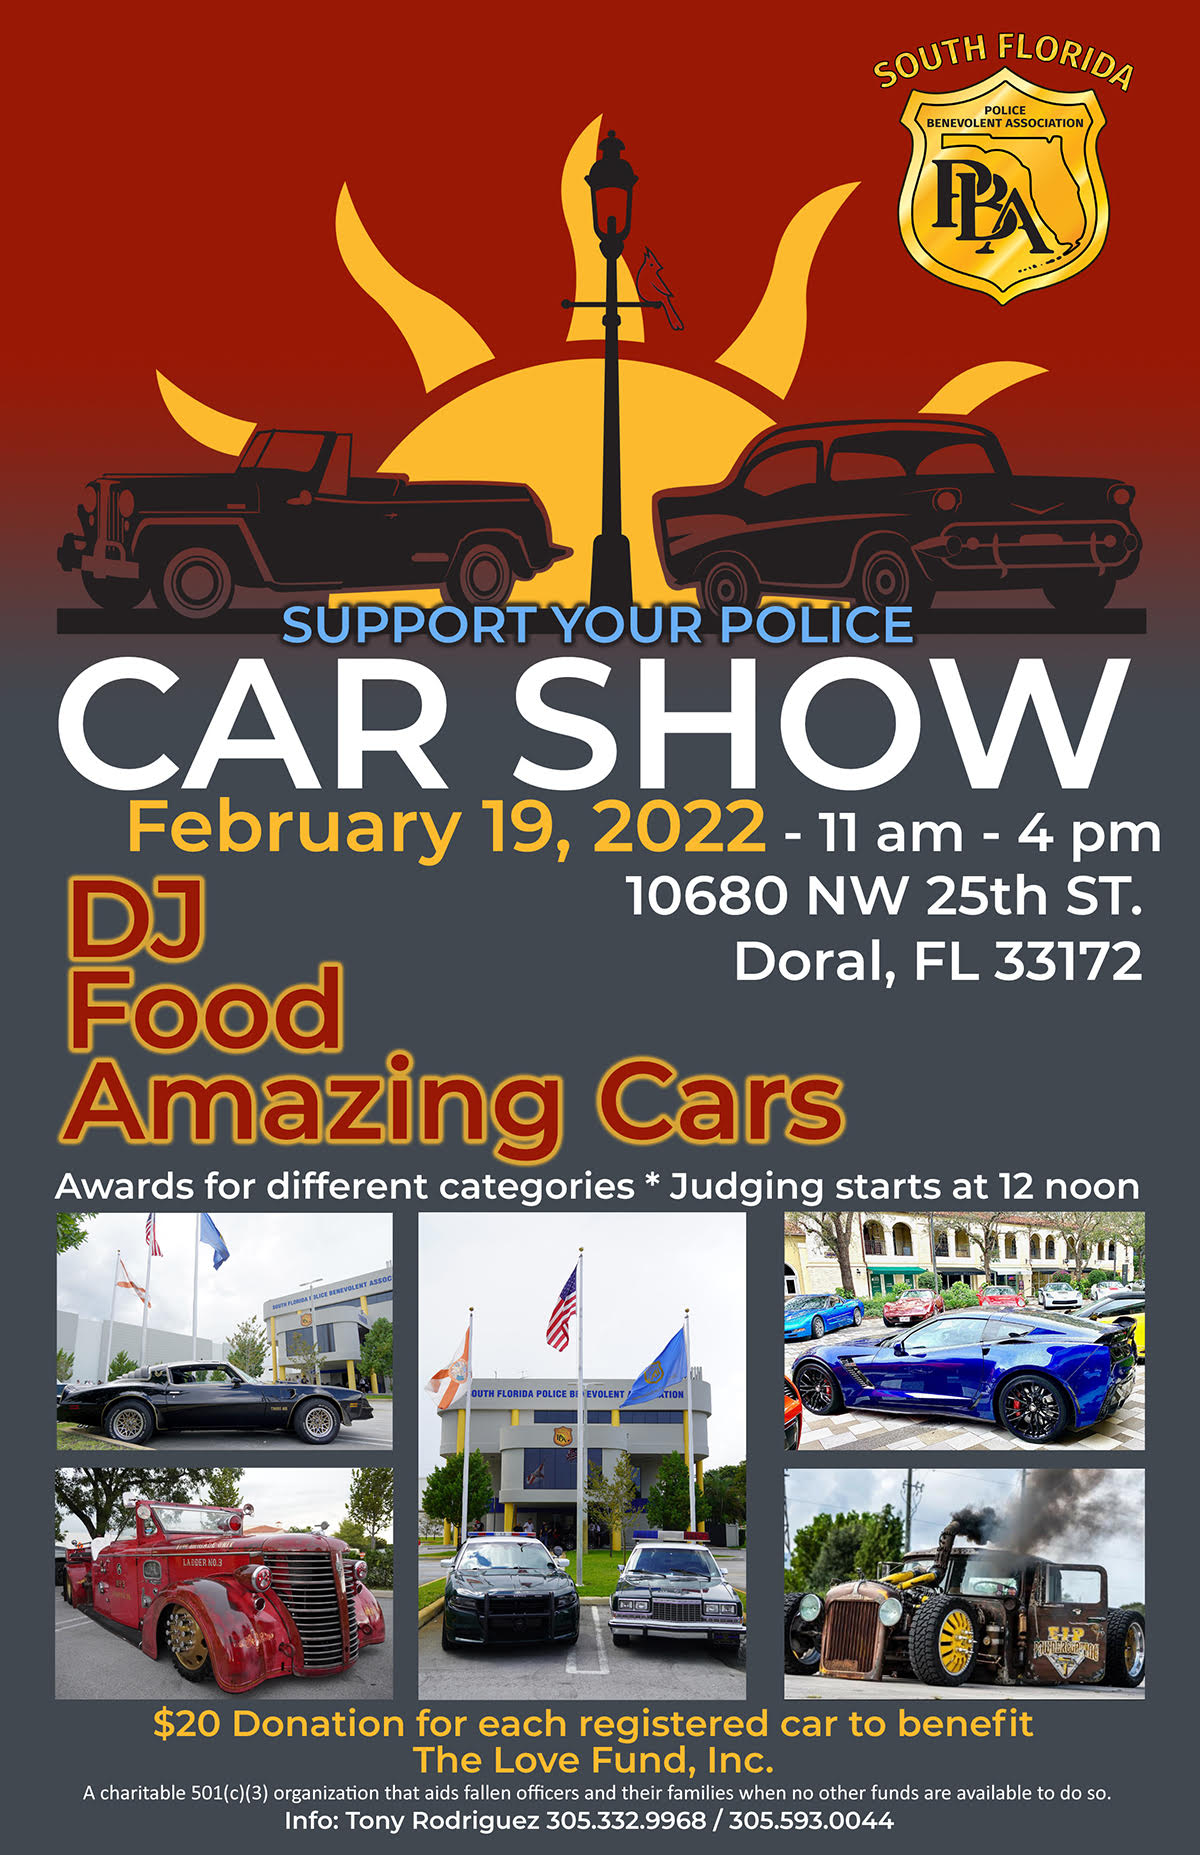 Support Your Police Car Show